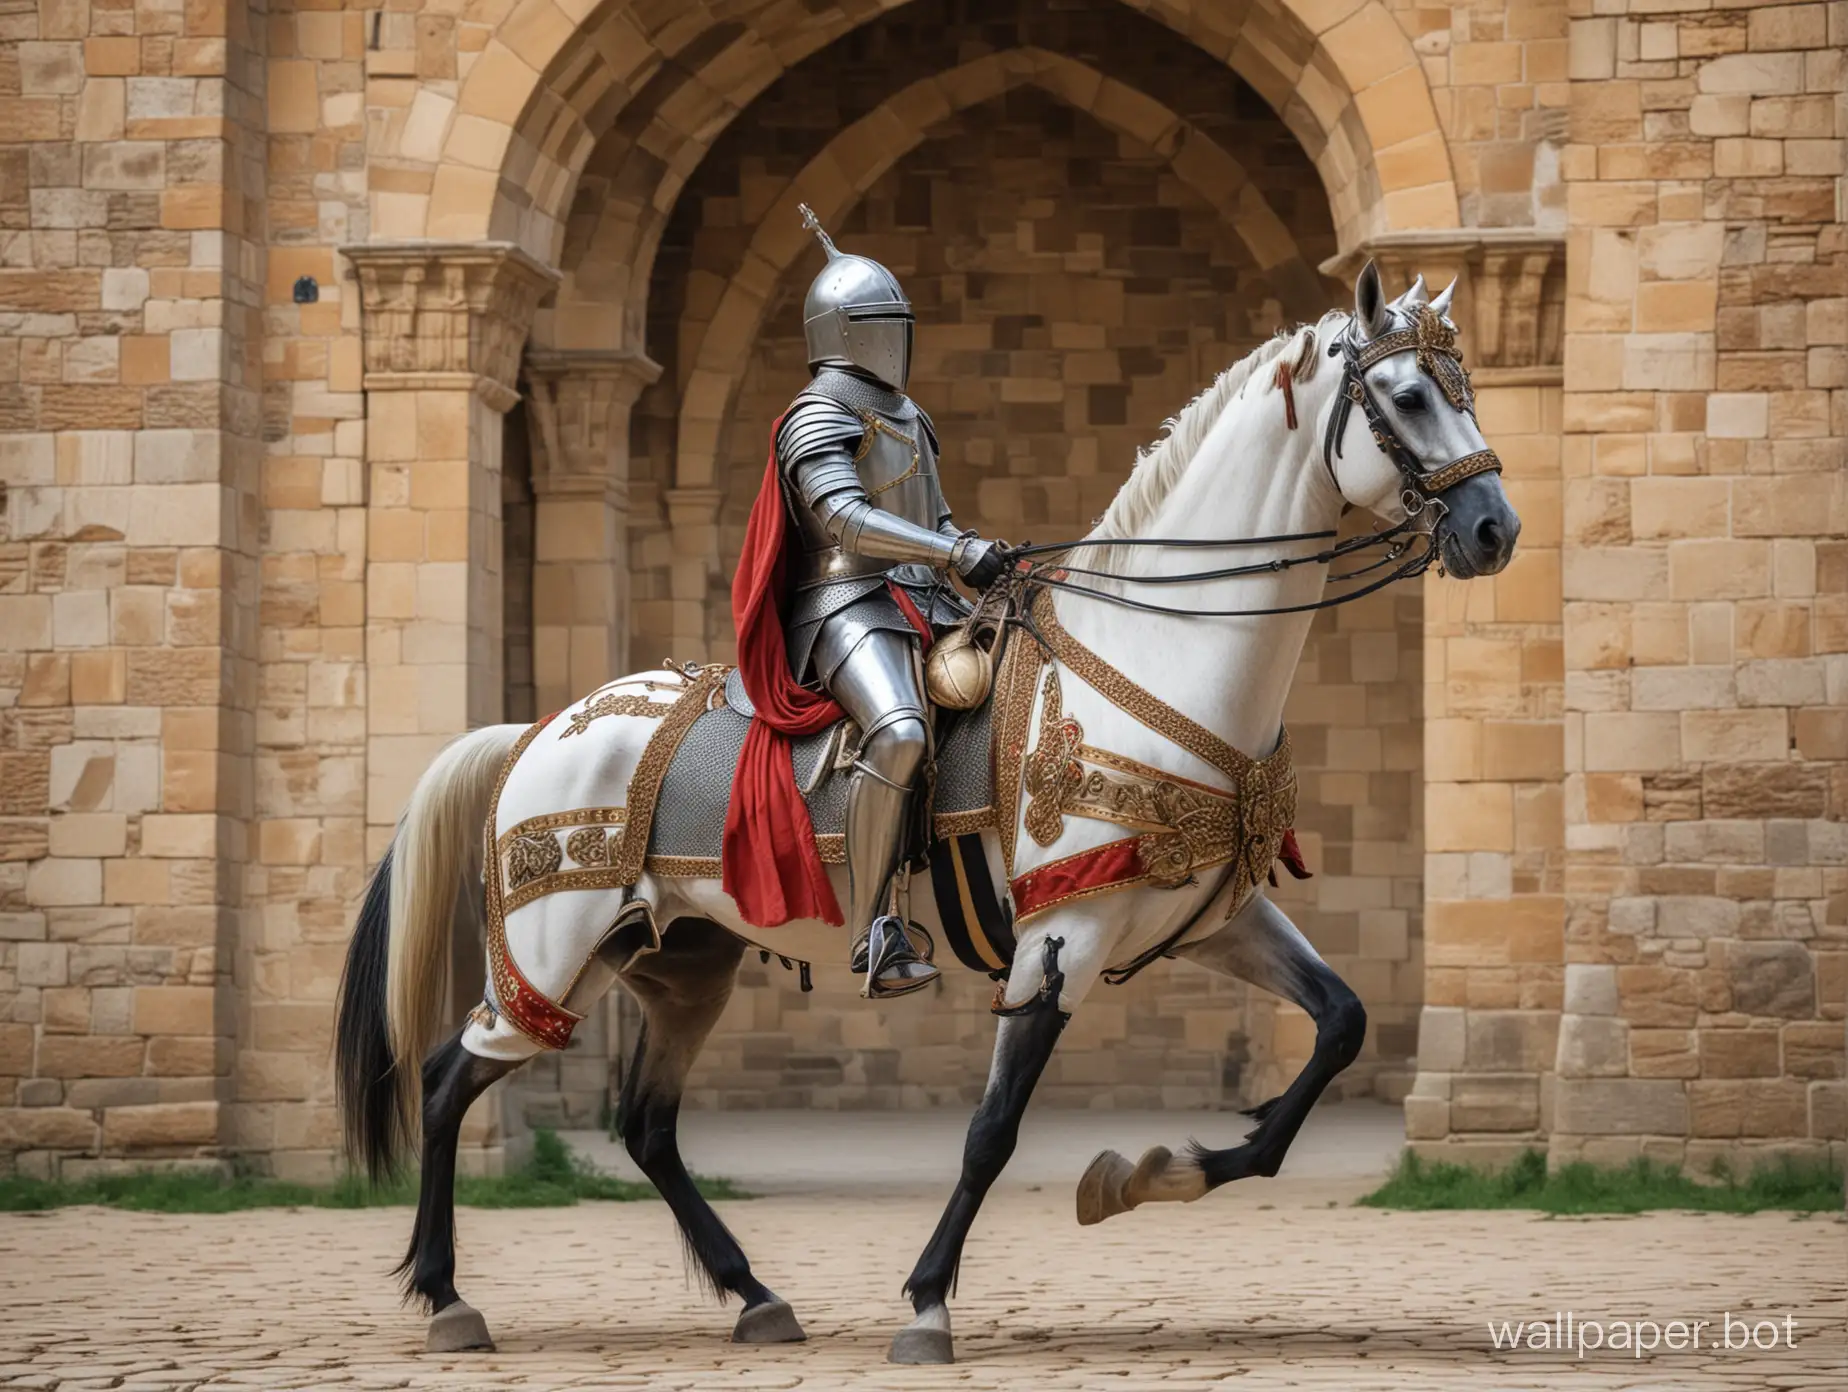 A beetle dressed as a knight on a Arabian horse in a medieval castle